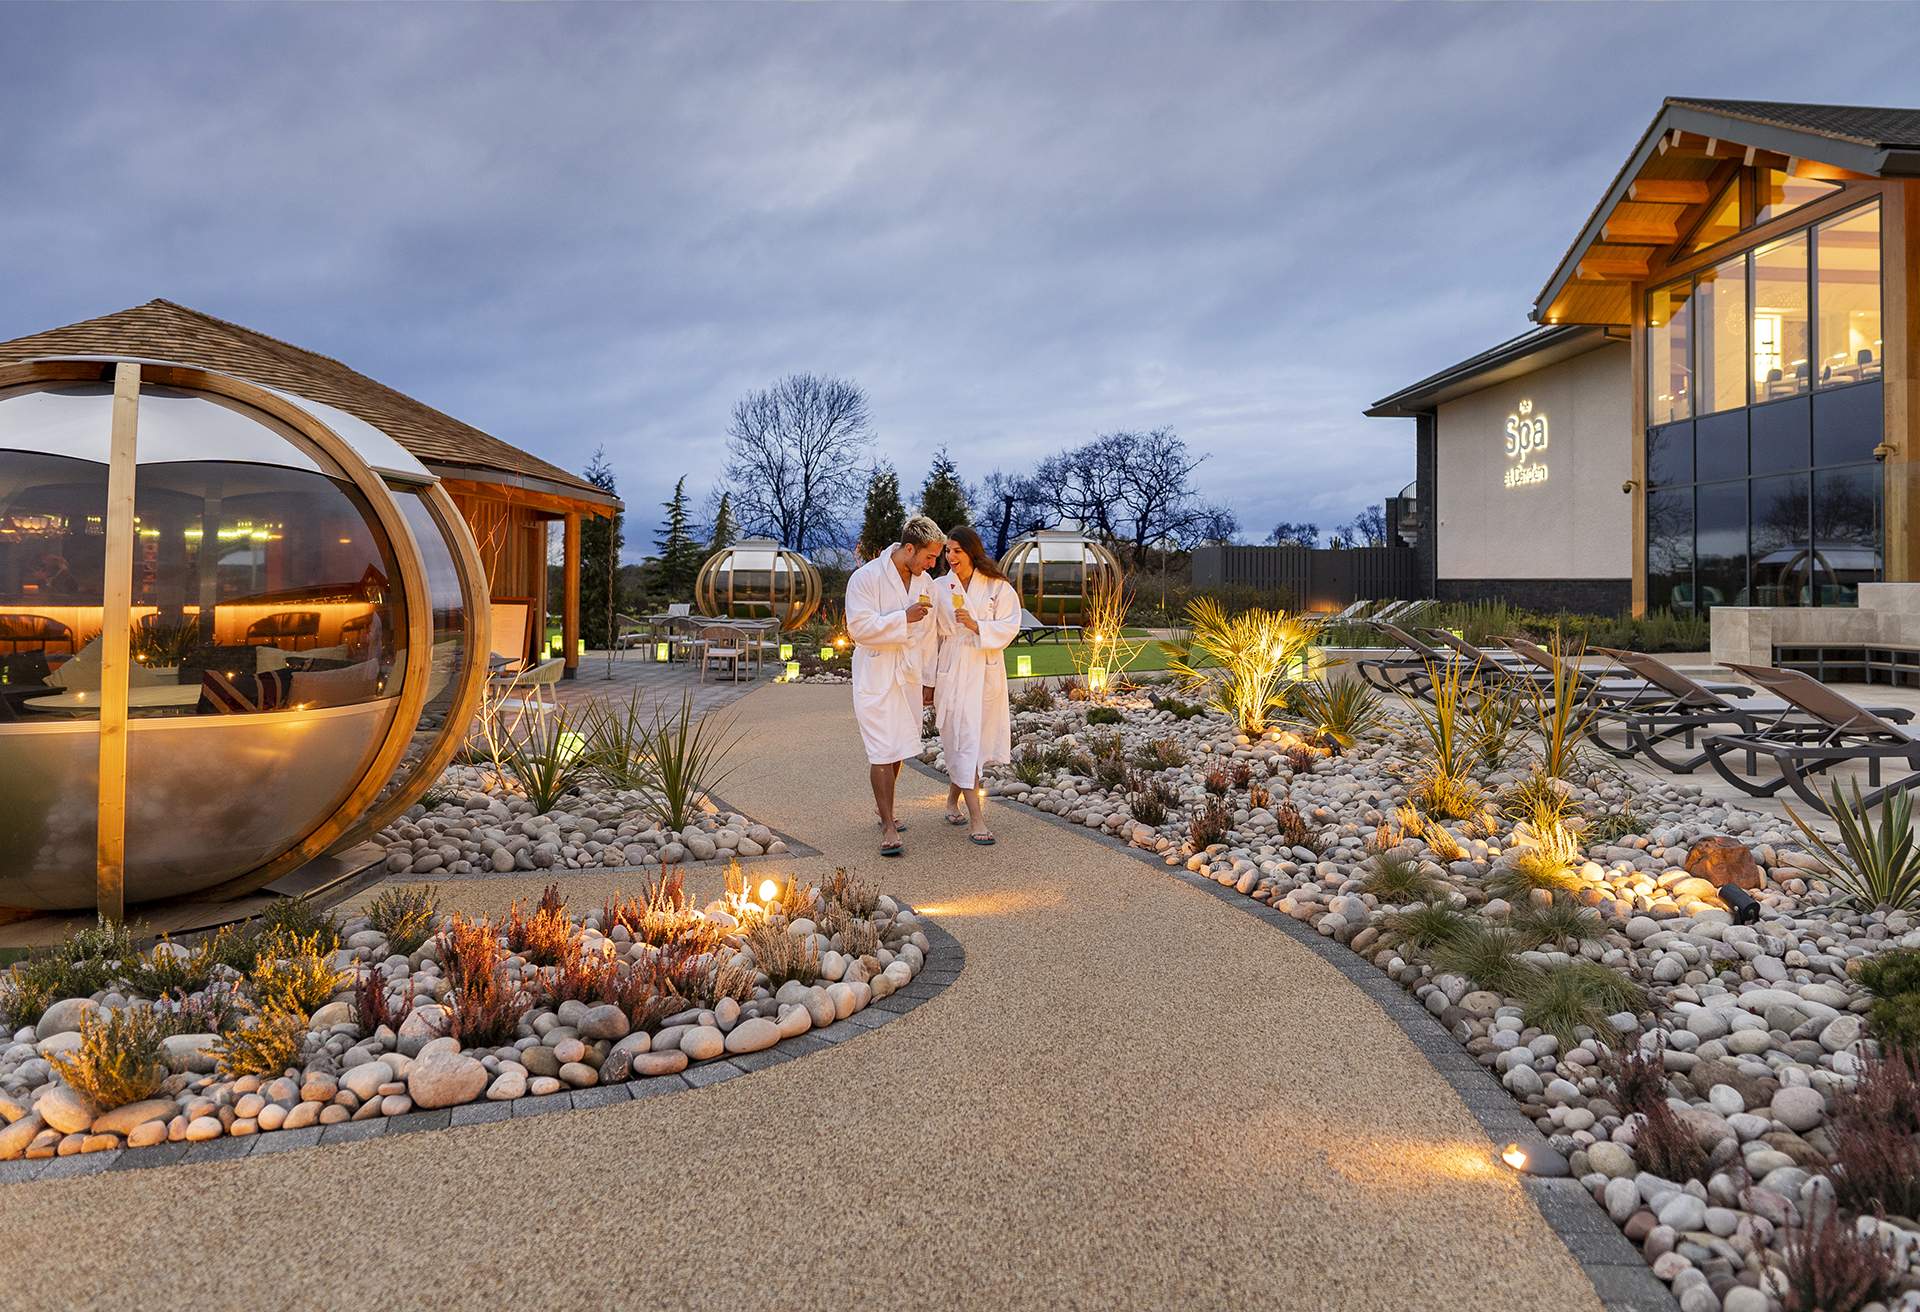 Couple walking outside the Spa at Carden Park Hotel Cheshire, UK